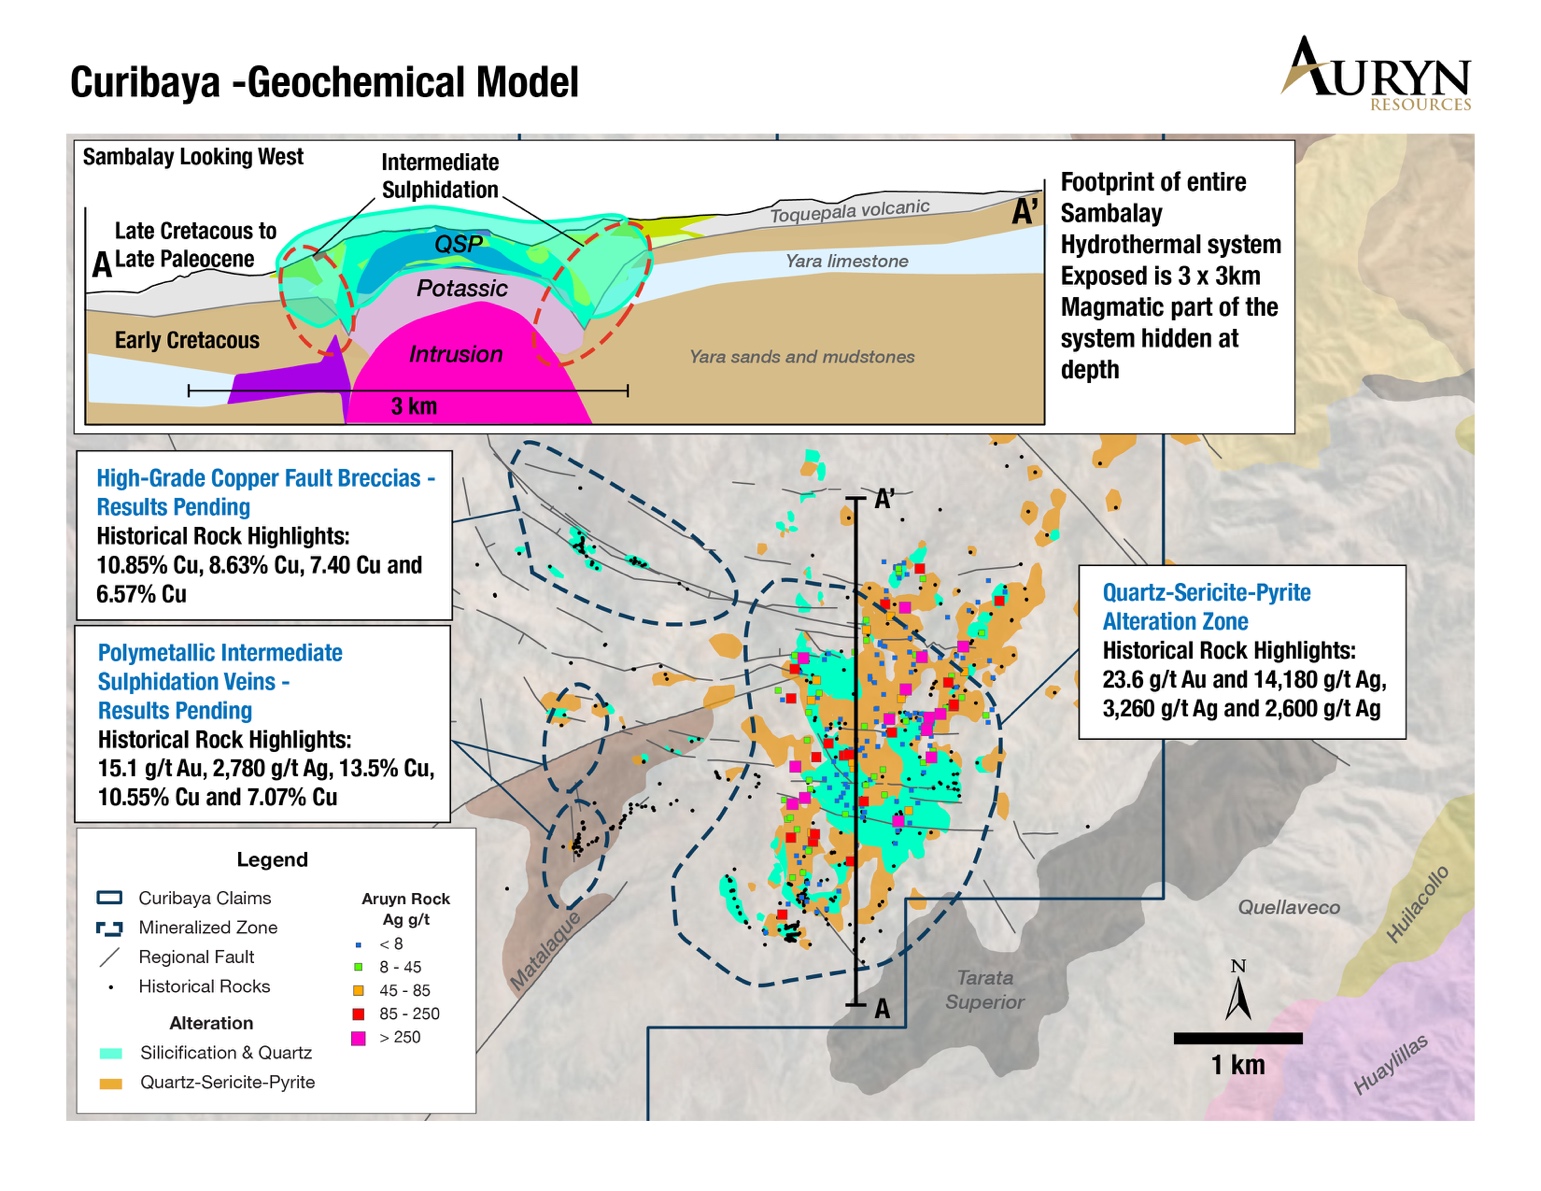 Auryn Resources Inc., Monday, October 28, 2019, Press release picture